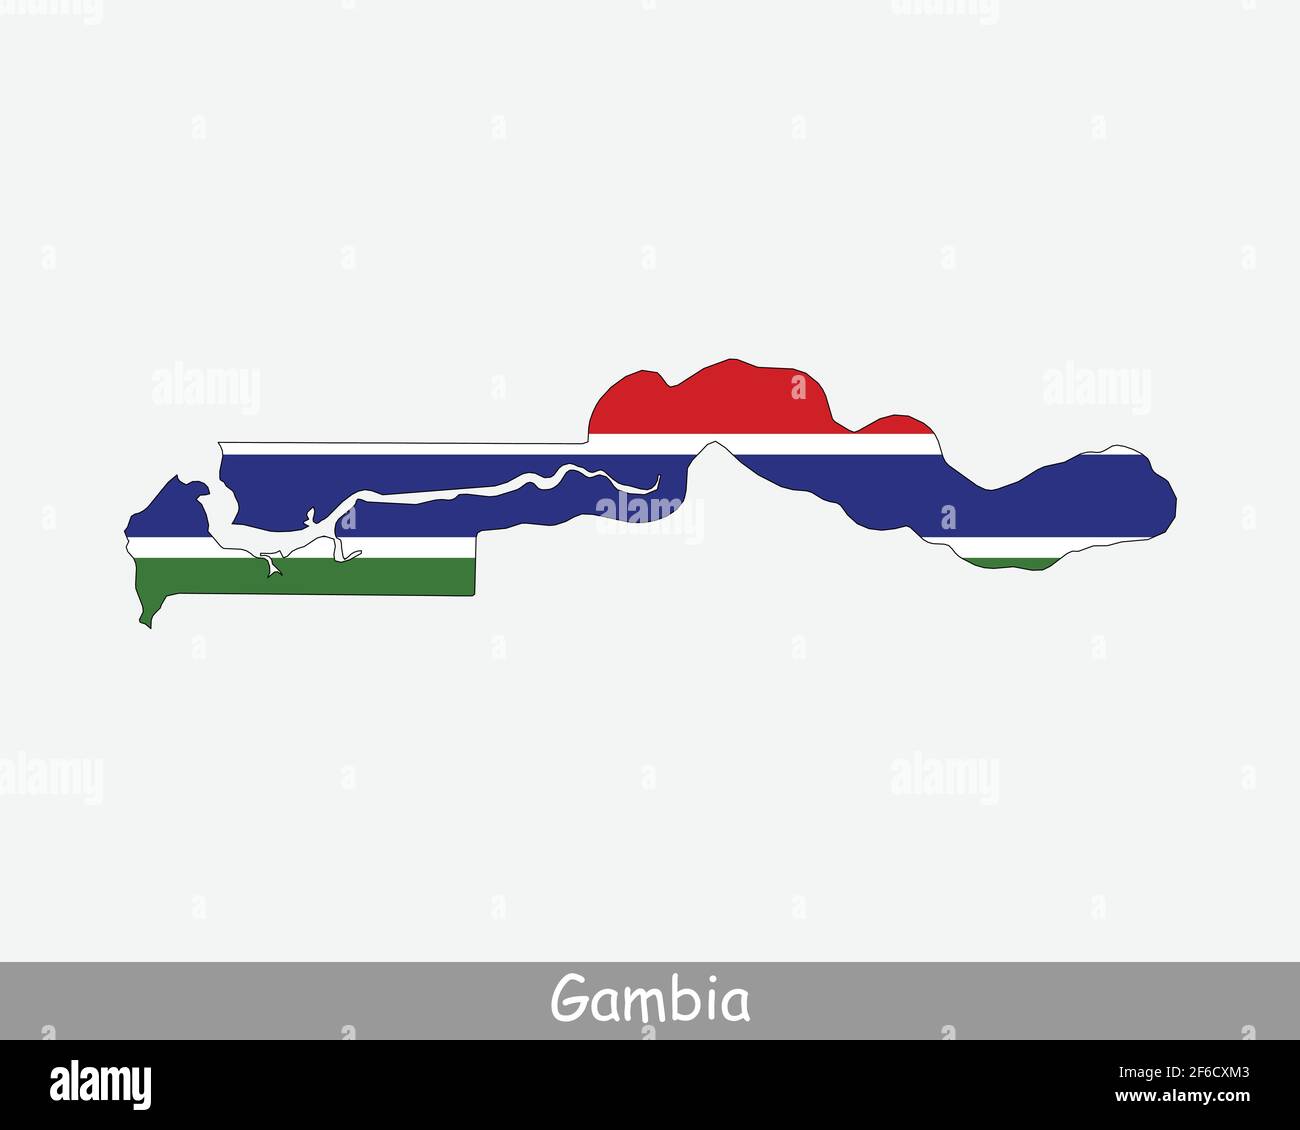 The Gambia Map Flag. Map of Republic of The Gambia with the Gambian national flag isolated on white background. Vector Illustration. Stock Vector